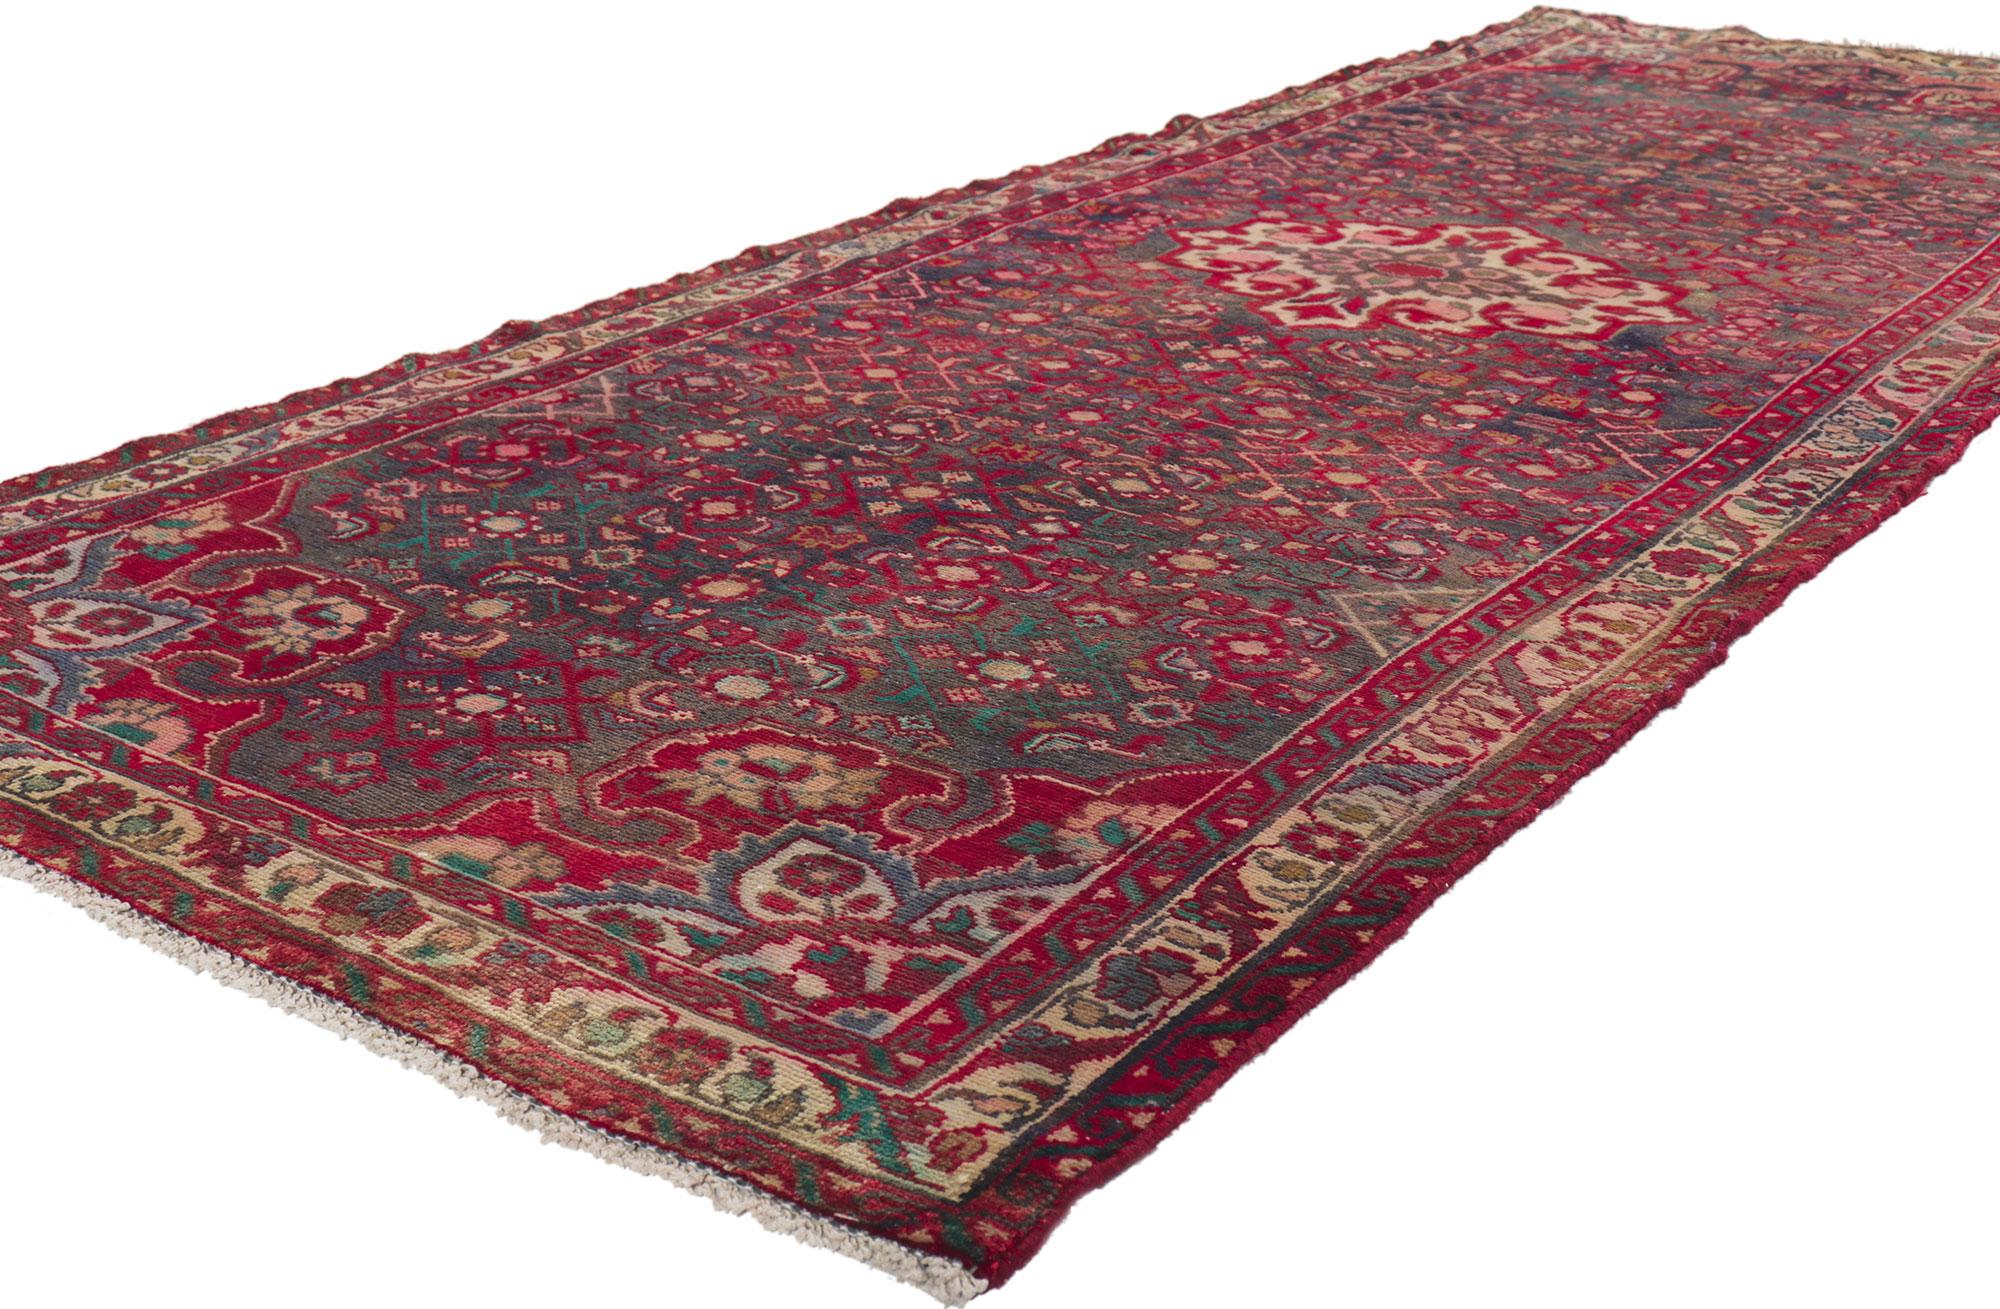 61218 Vintage Persian Hosseinabad Runner, 03'06 x 09'06.
With its effortless beauty, incredible detail and texture, this hand knotted wool vintage Persian Hosseinabad runner is a captivating vision of woven beauty. The classic Herati design and